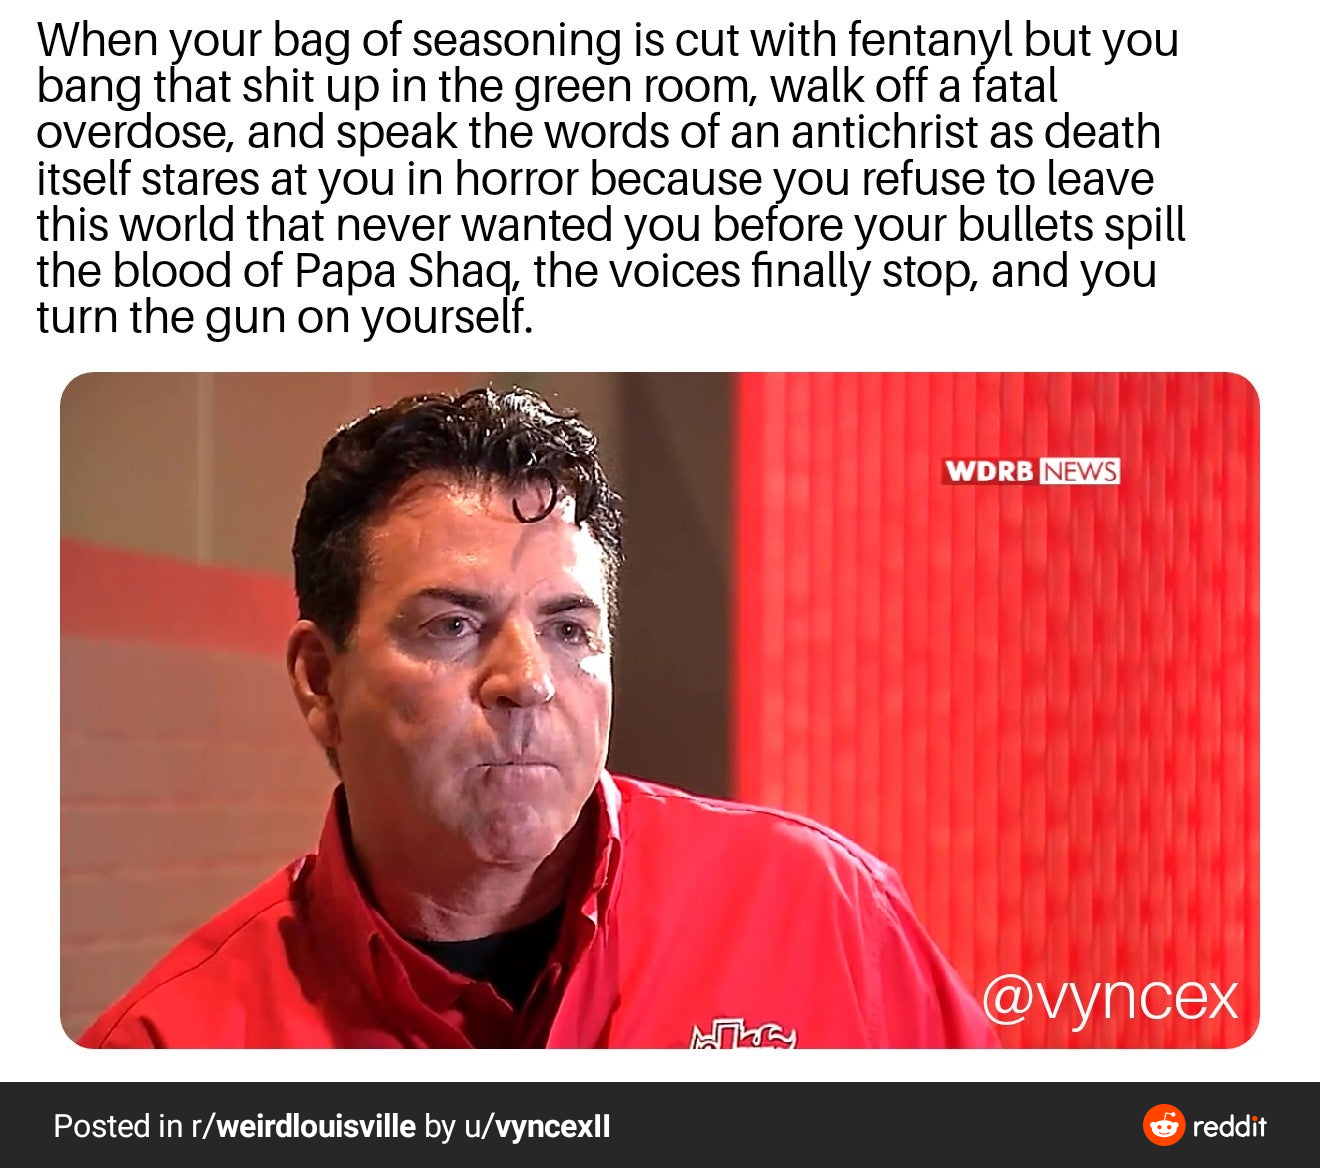 photo caption - When your bag of seasoning is cut with fentanyl but you bang that shit up in the green room, walk off a fatal overdose, and speak the words of an antichrist as death itself stares at you in horror because vou refuse to leave this world tha